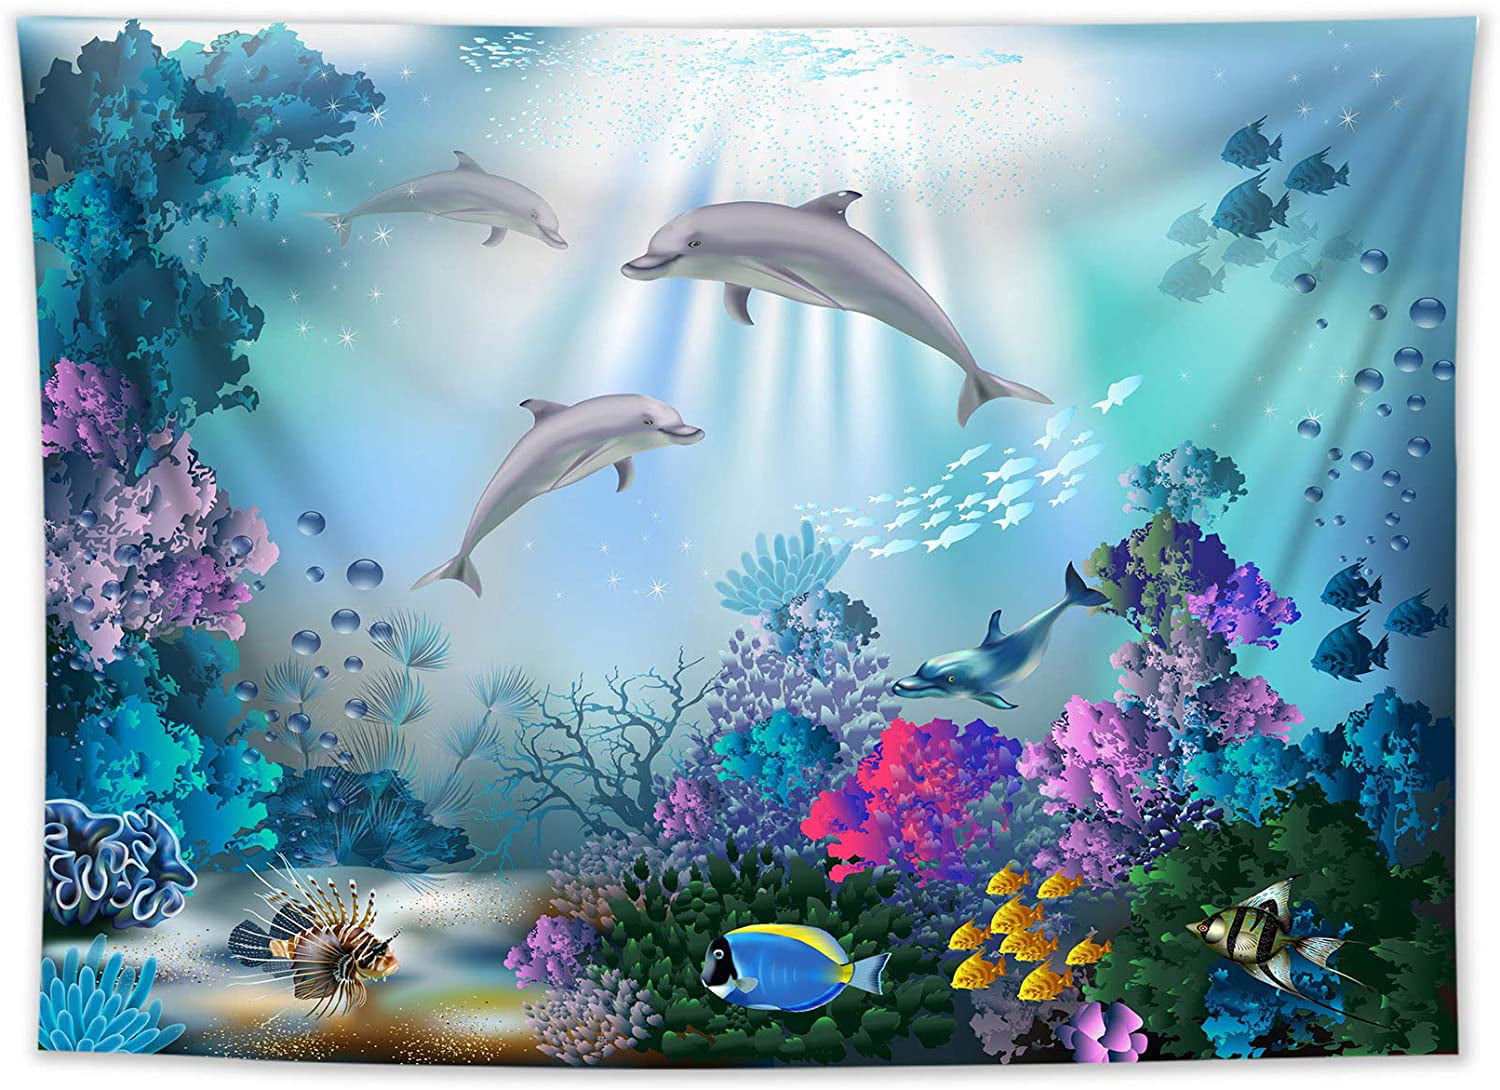 Underwater World Dolphins and Plants Tapestry Wall Hanging Living Room Bedroom 